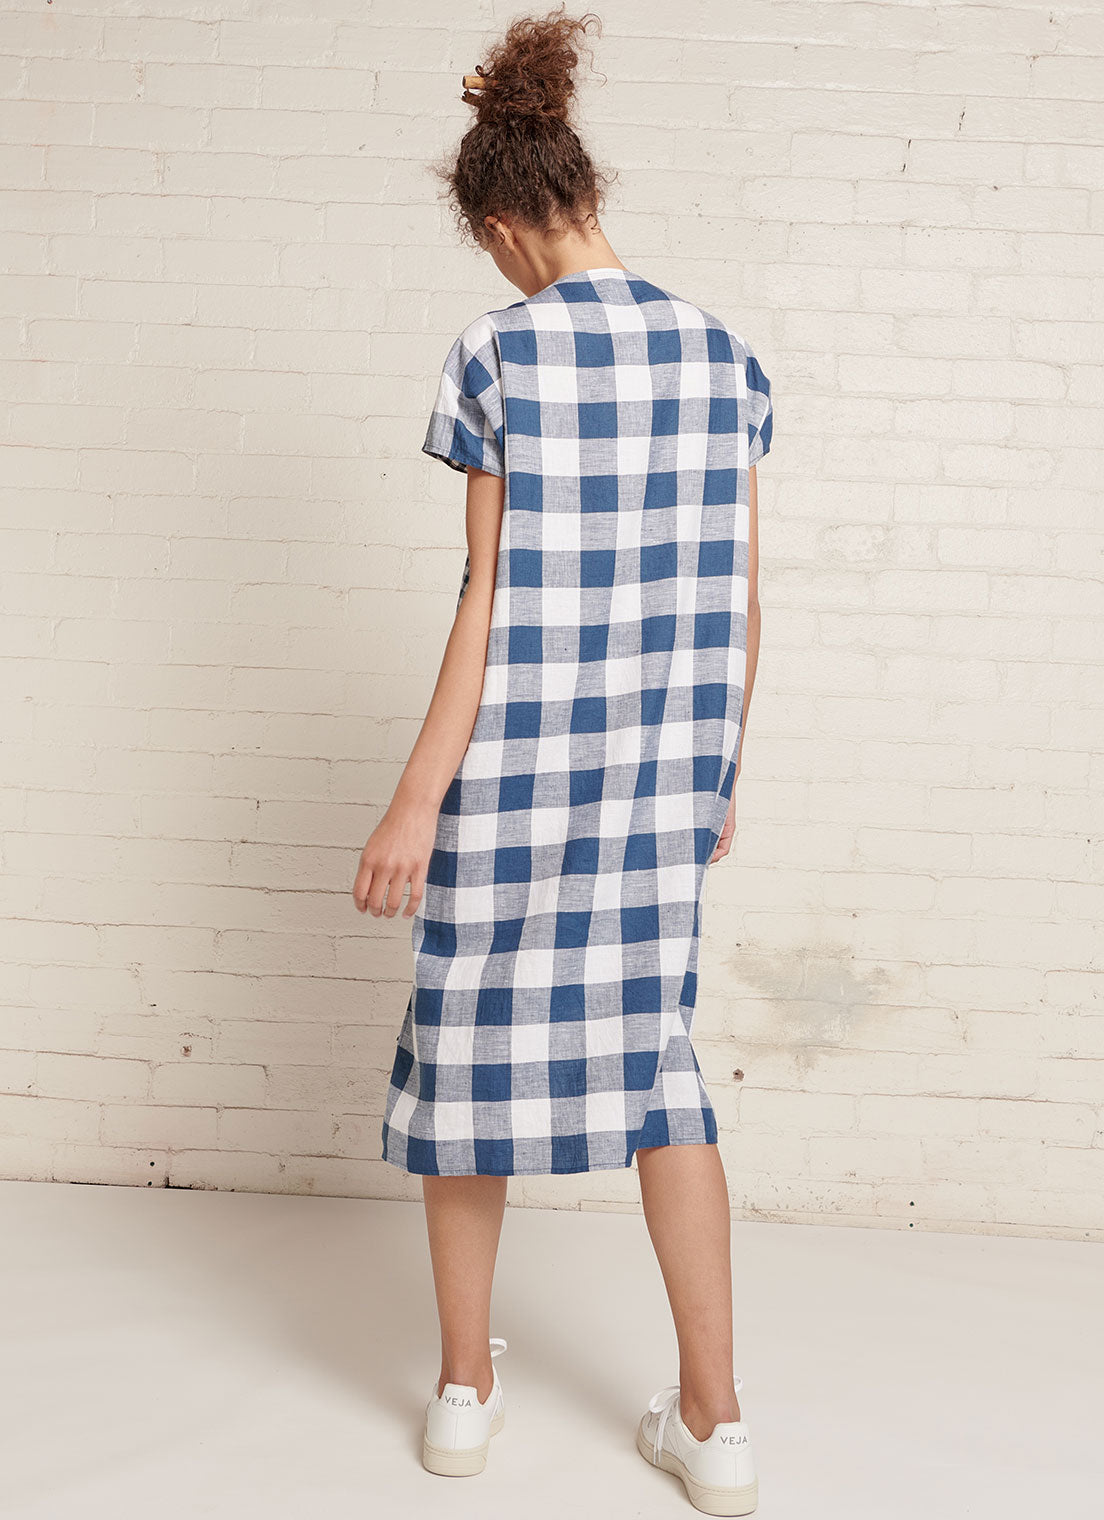 An indigo and white gingham linen dress with short sleeves, open neckline and centre front pleat detail made from mixed gingham yarn dye washed linen